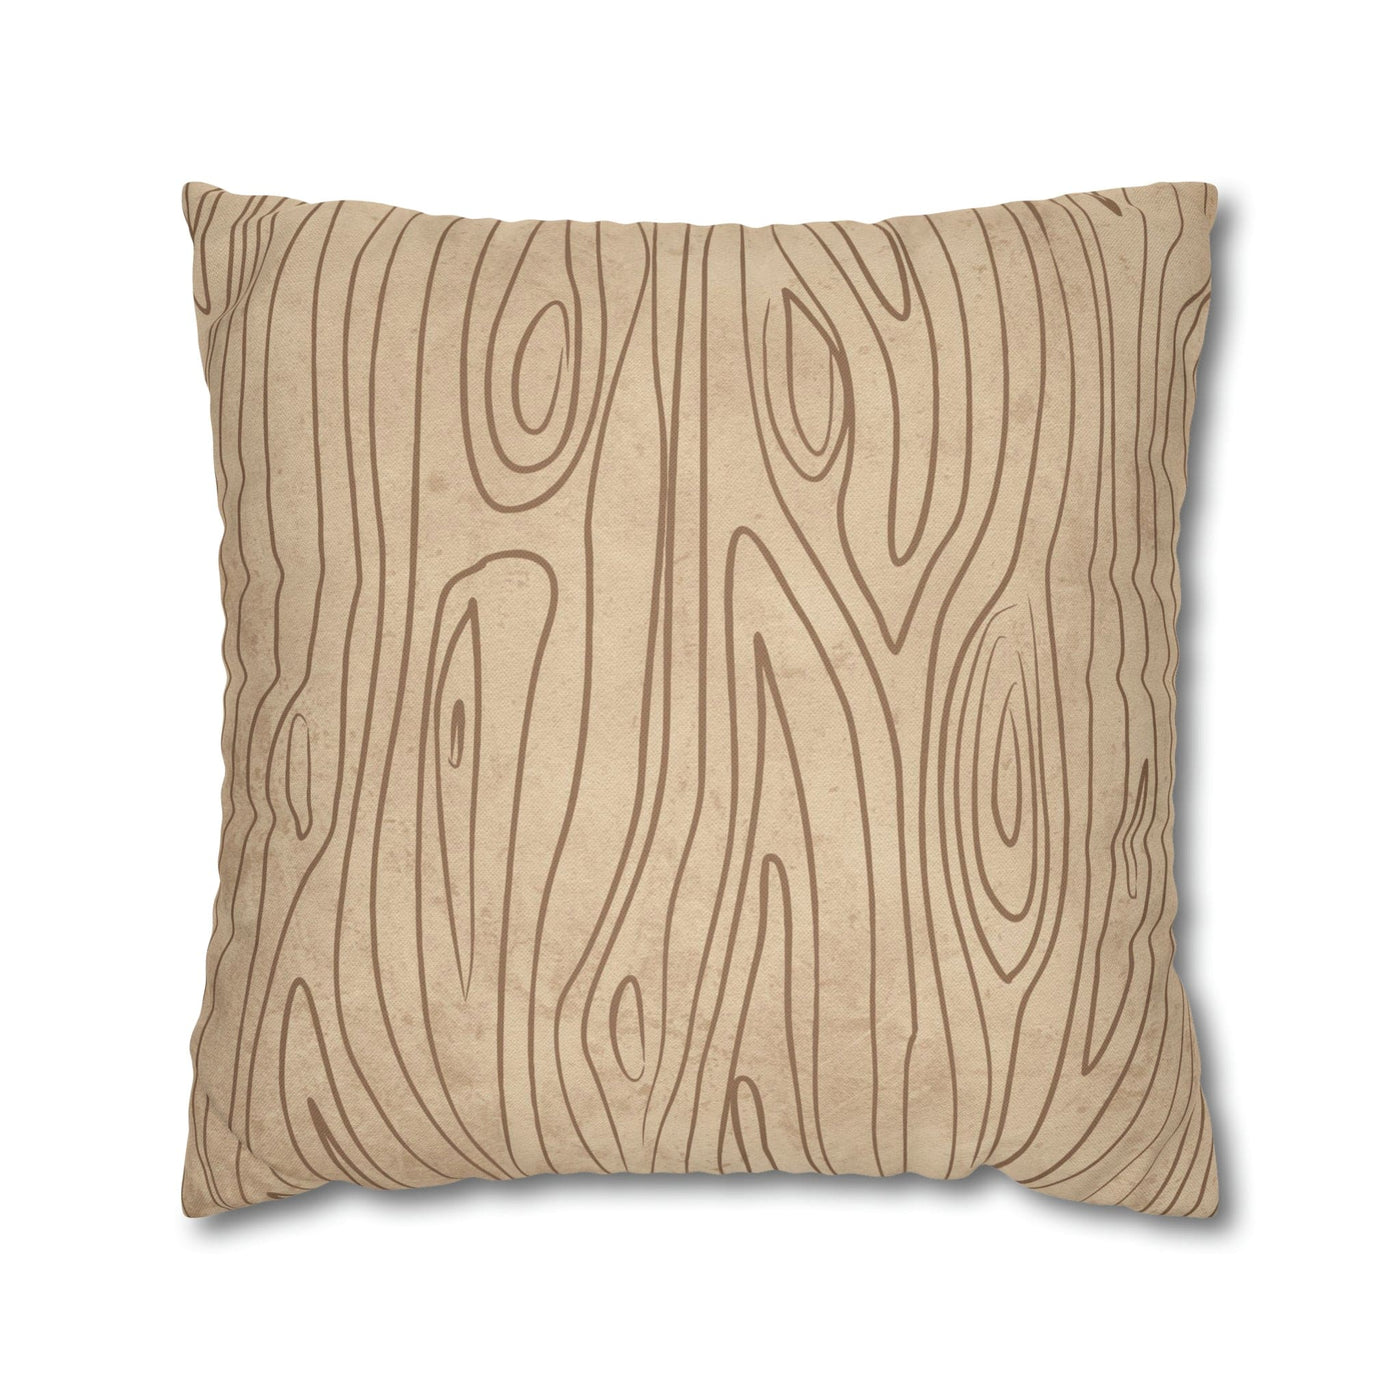 Decorative Throw Pillow Covers With Zipper - Set Of 2 Beige And Brown Tree